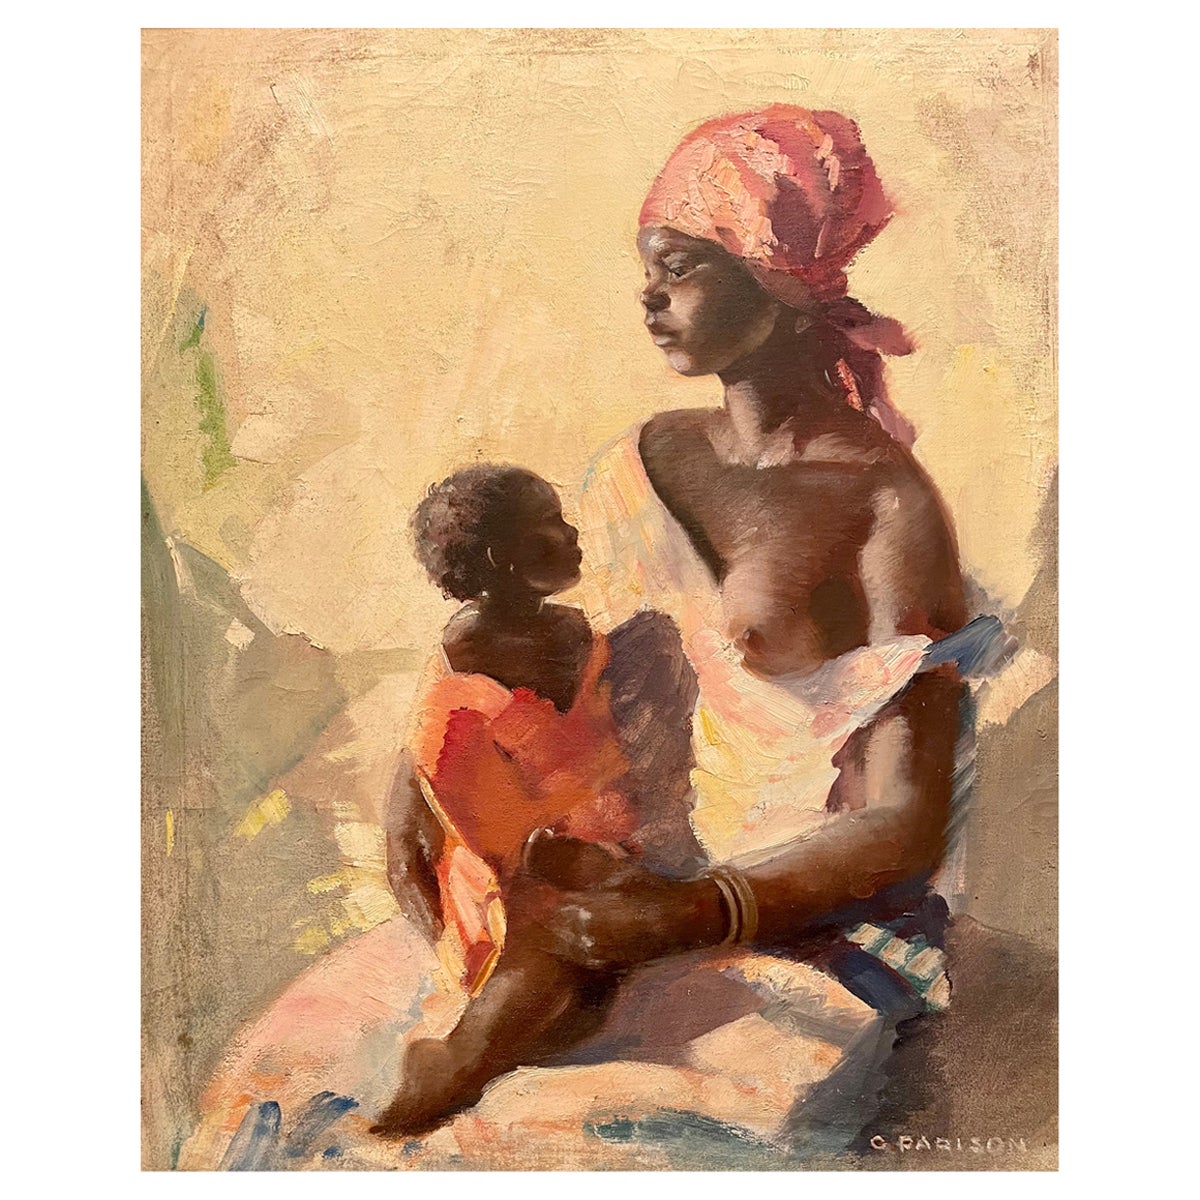 Gaston Parison, Malagasy Woman and Her Child, 19th Century